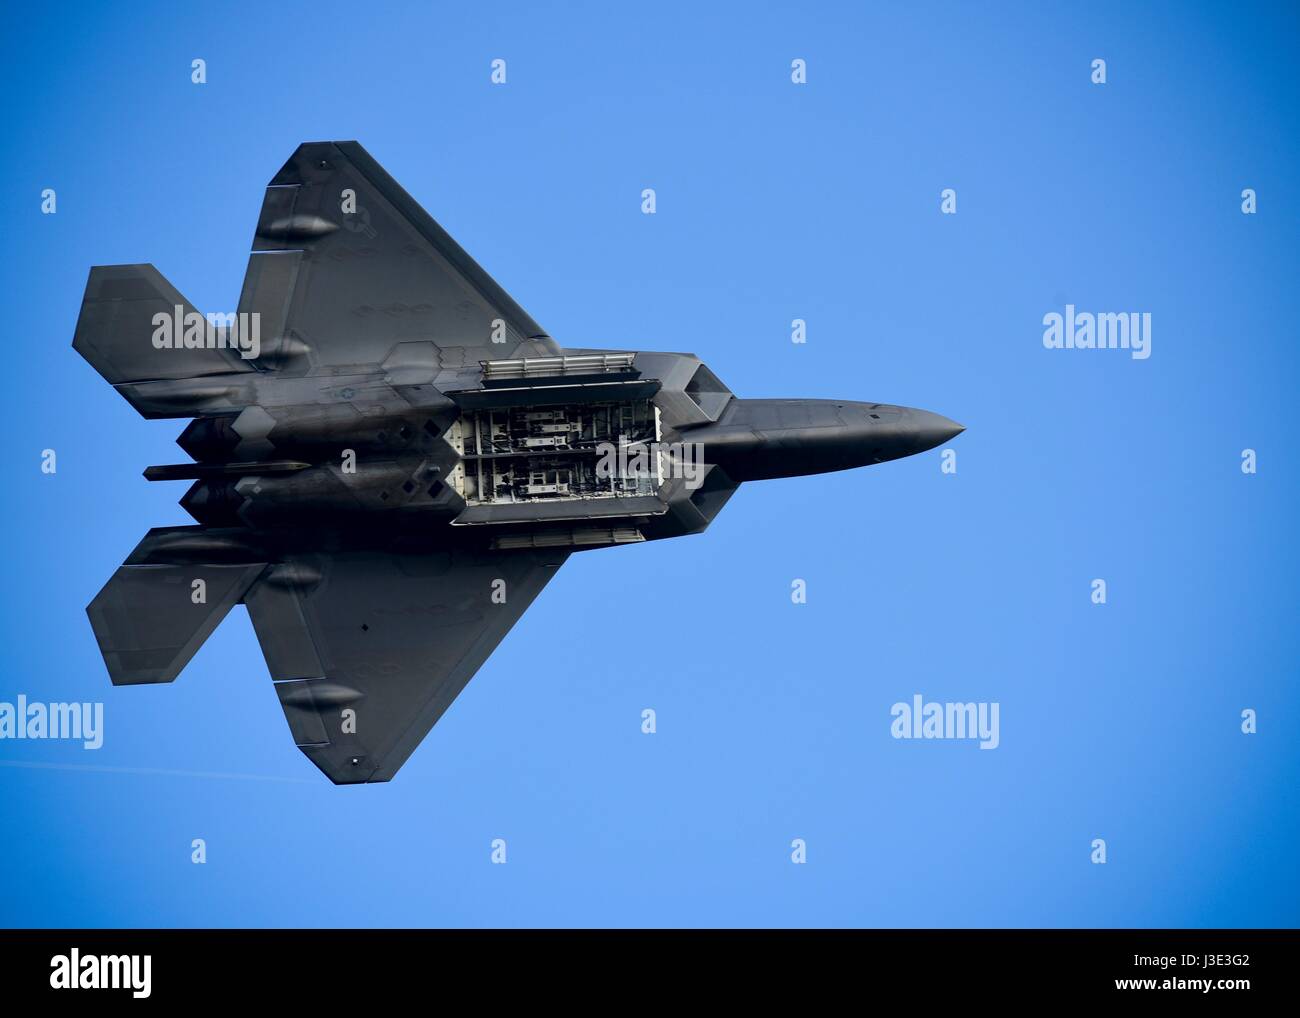 The USAF F-22 Raptor stealth tactical fighter aircraft does a fly-by during the Atlantic Trident World War I Remembrance Day at Joint Base Langley-Eustis April 21, 2017 near Hampton, Virginia.     (photo by Areca T. Bell /US Air Force  via Planetpix) Stock Photo